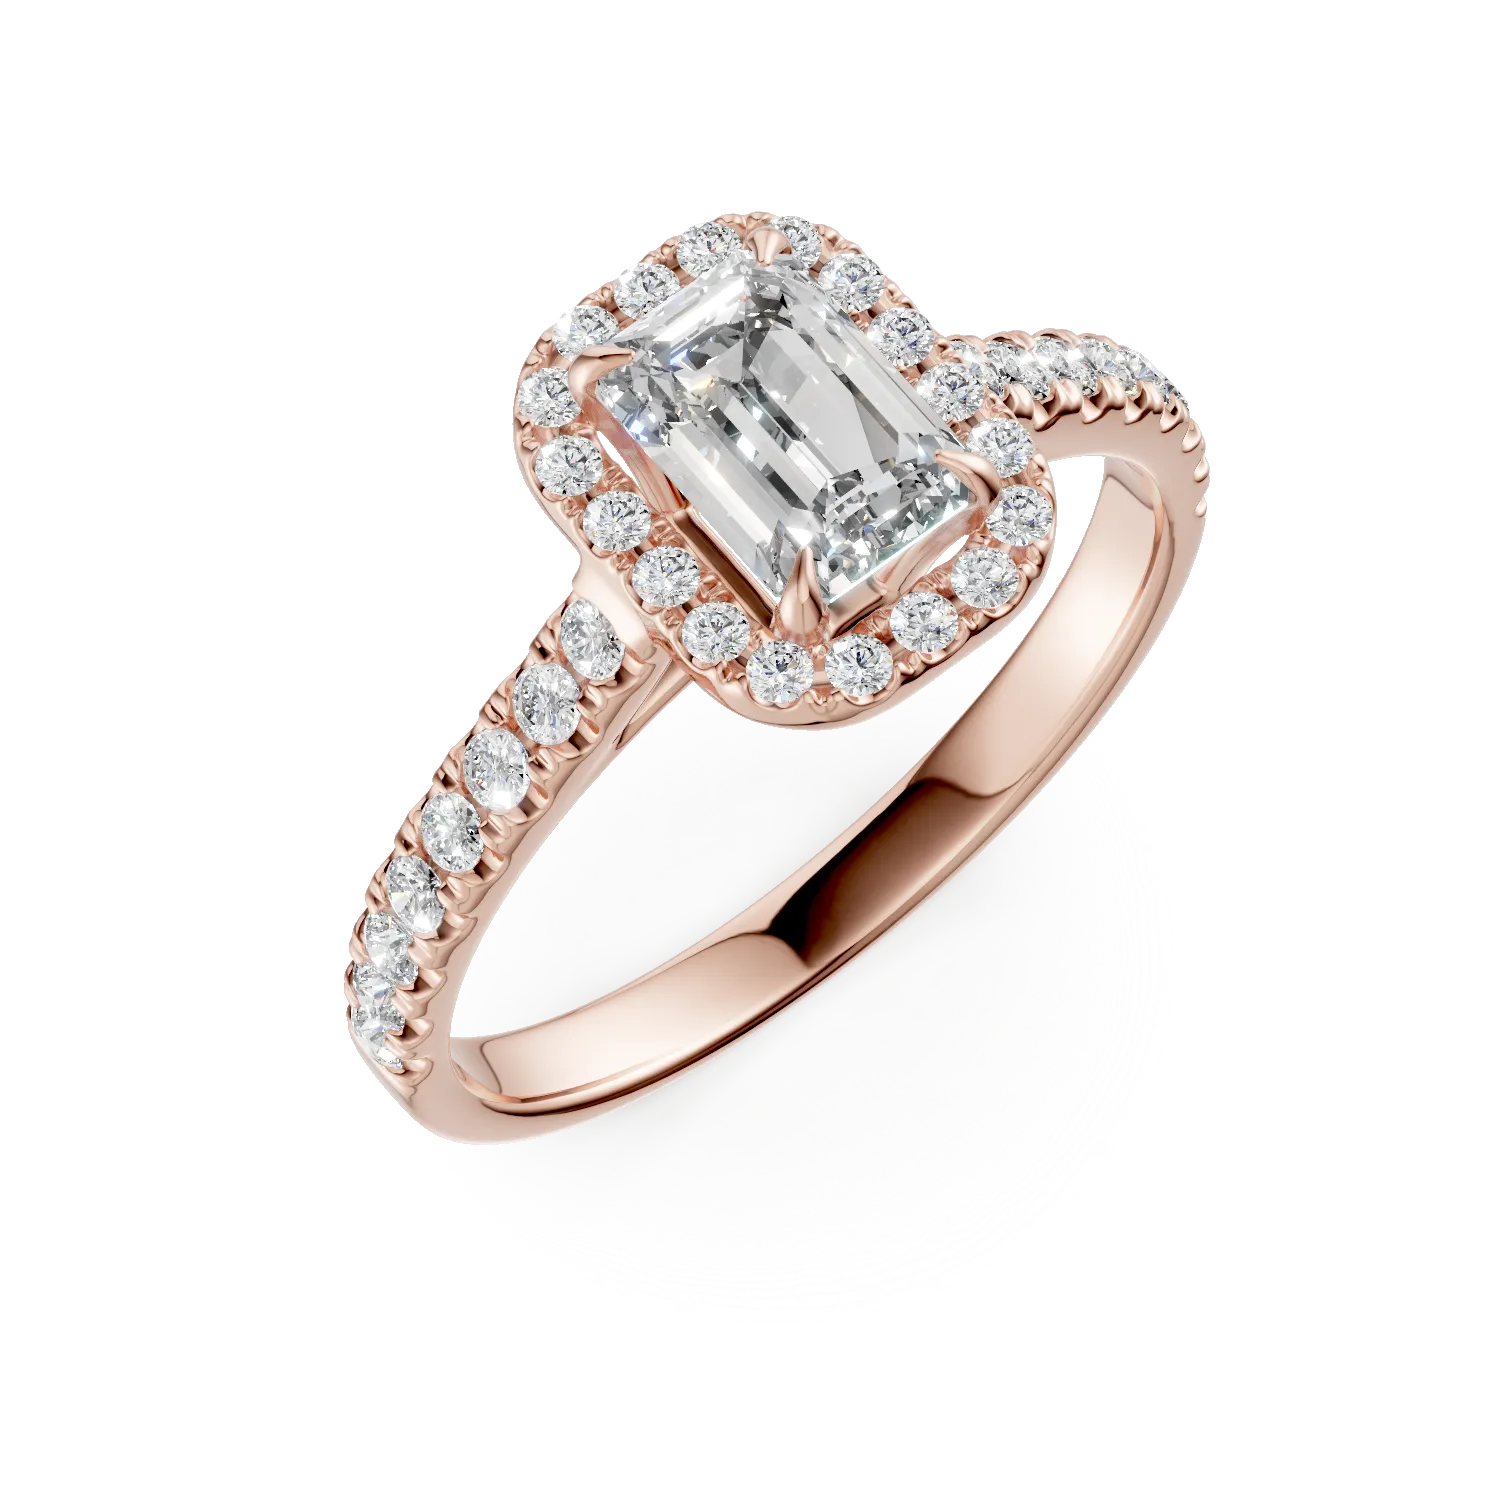 Rose gold engagement ring with 0.73ct diamond and 0.38ct diamonds